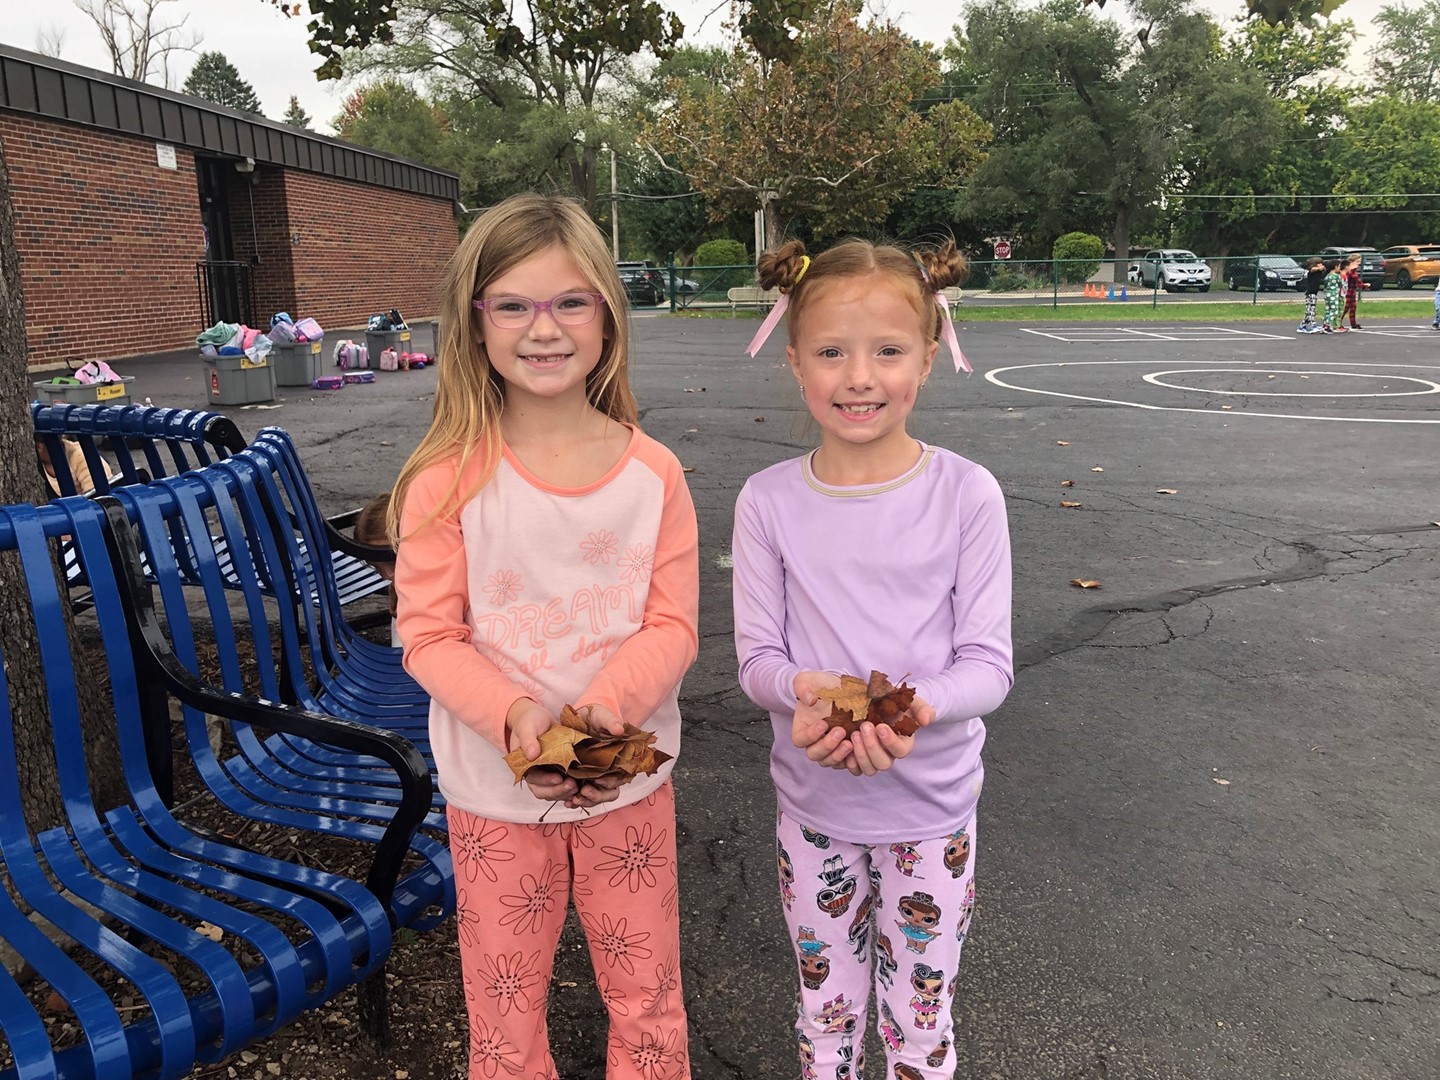 Students holding leaves at recess dressed in pajamas on PJ day.